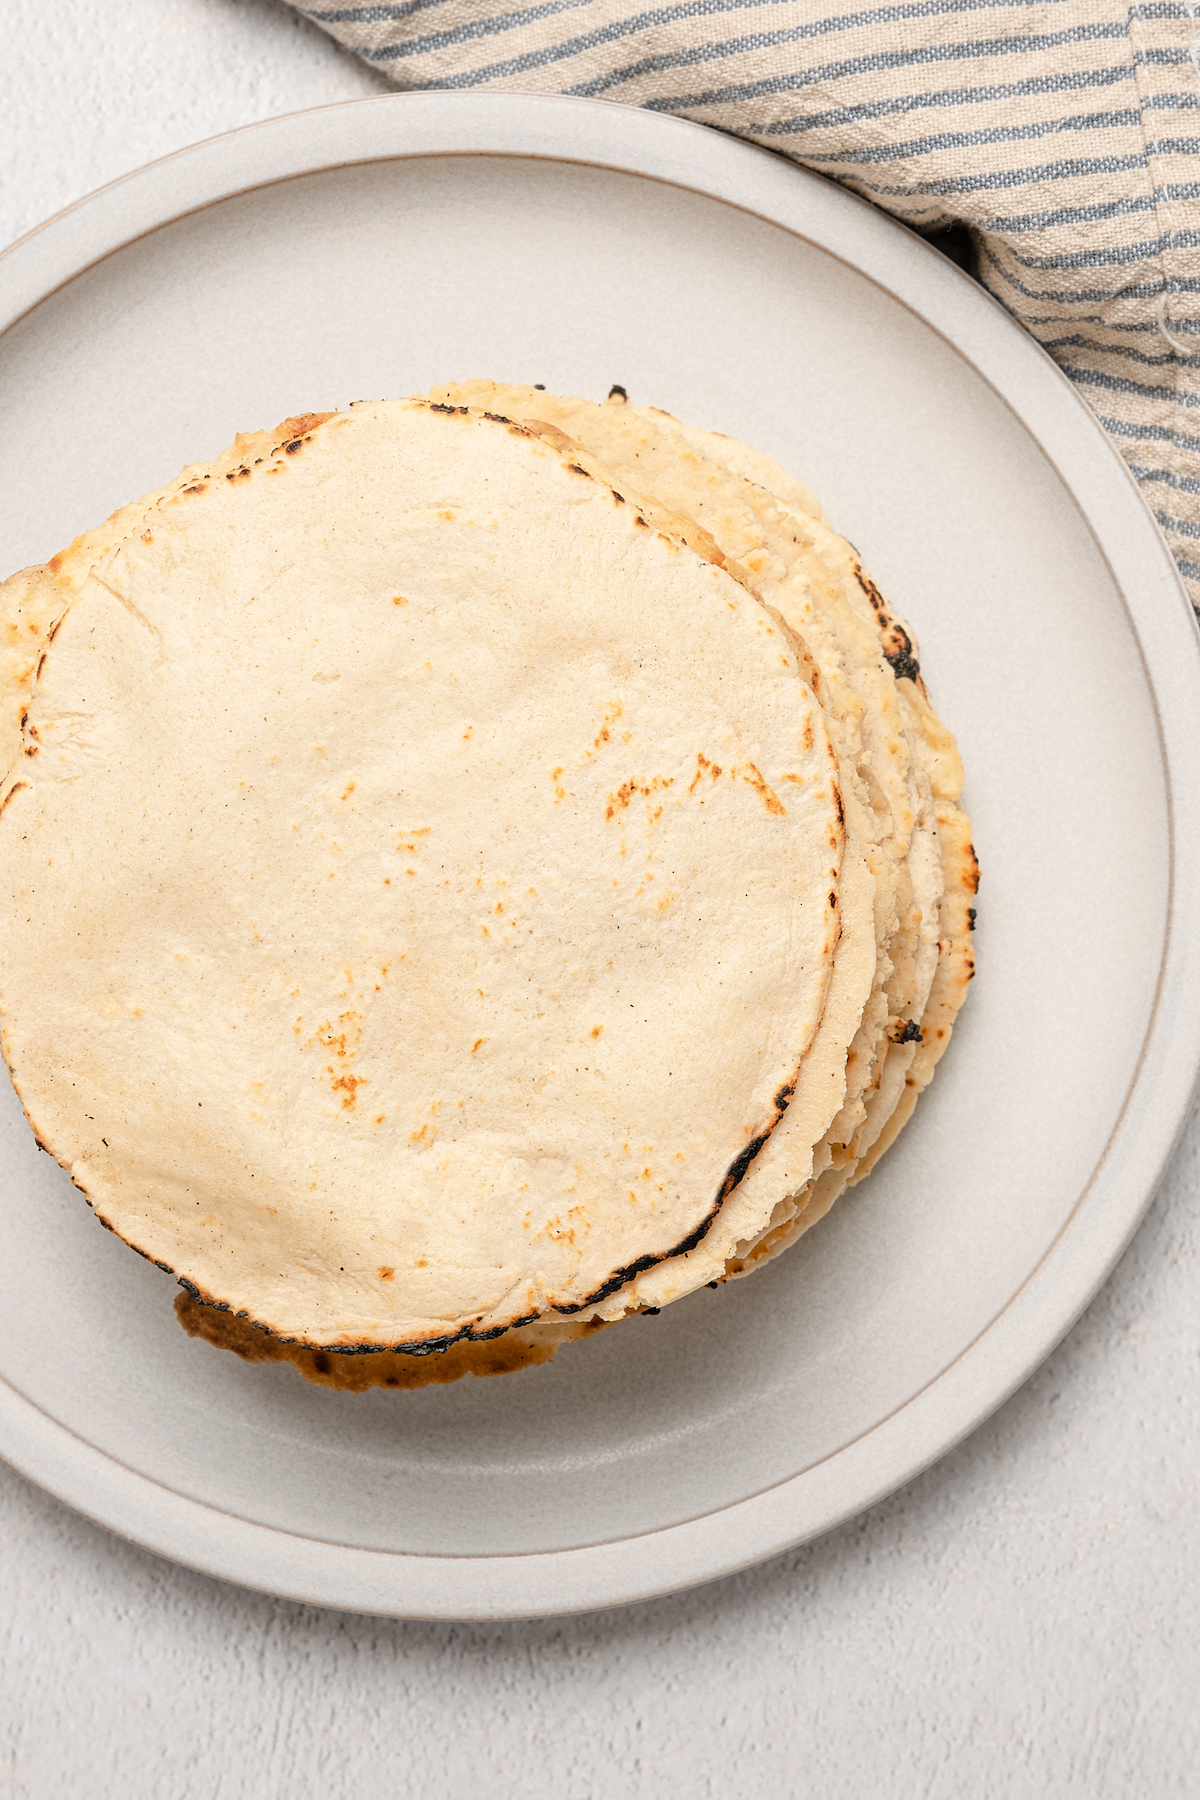 Overhead of a stack of tortillas from this authentic corn tortilla recipe.